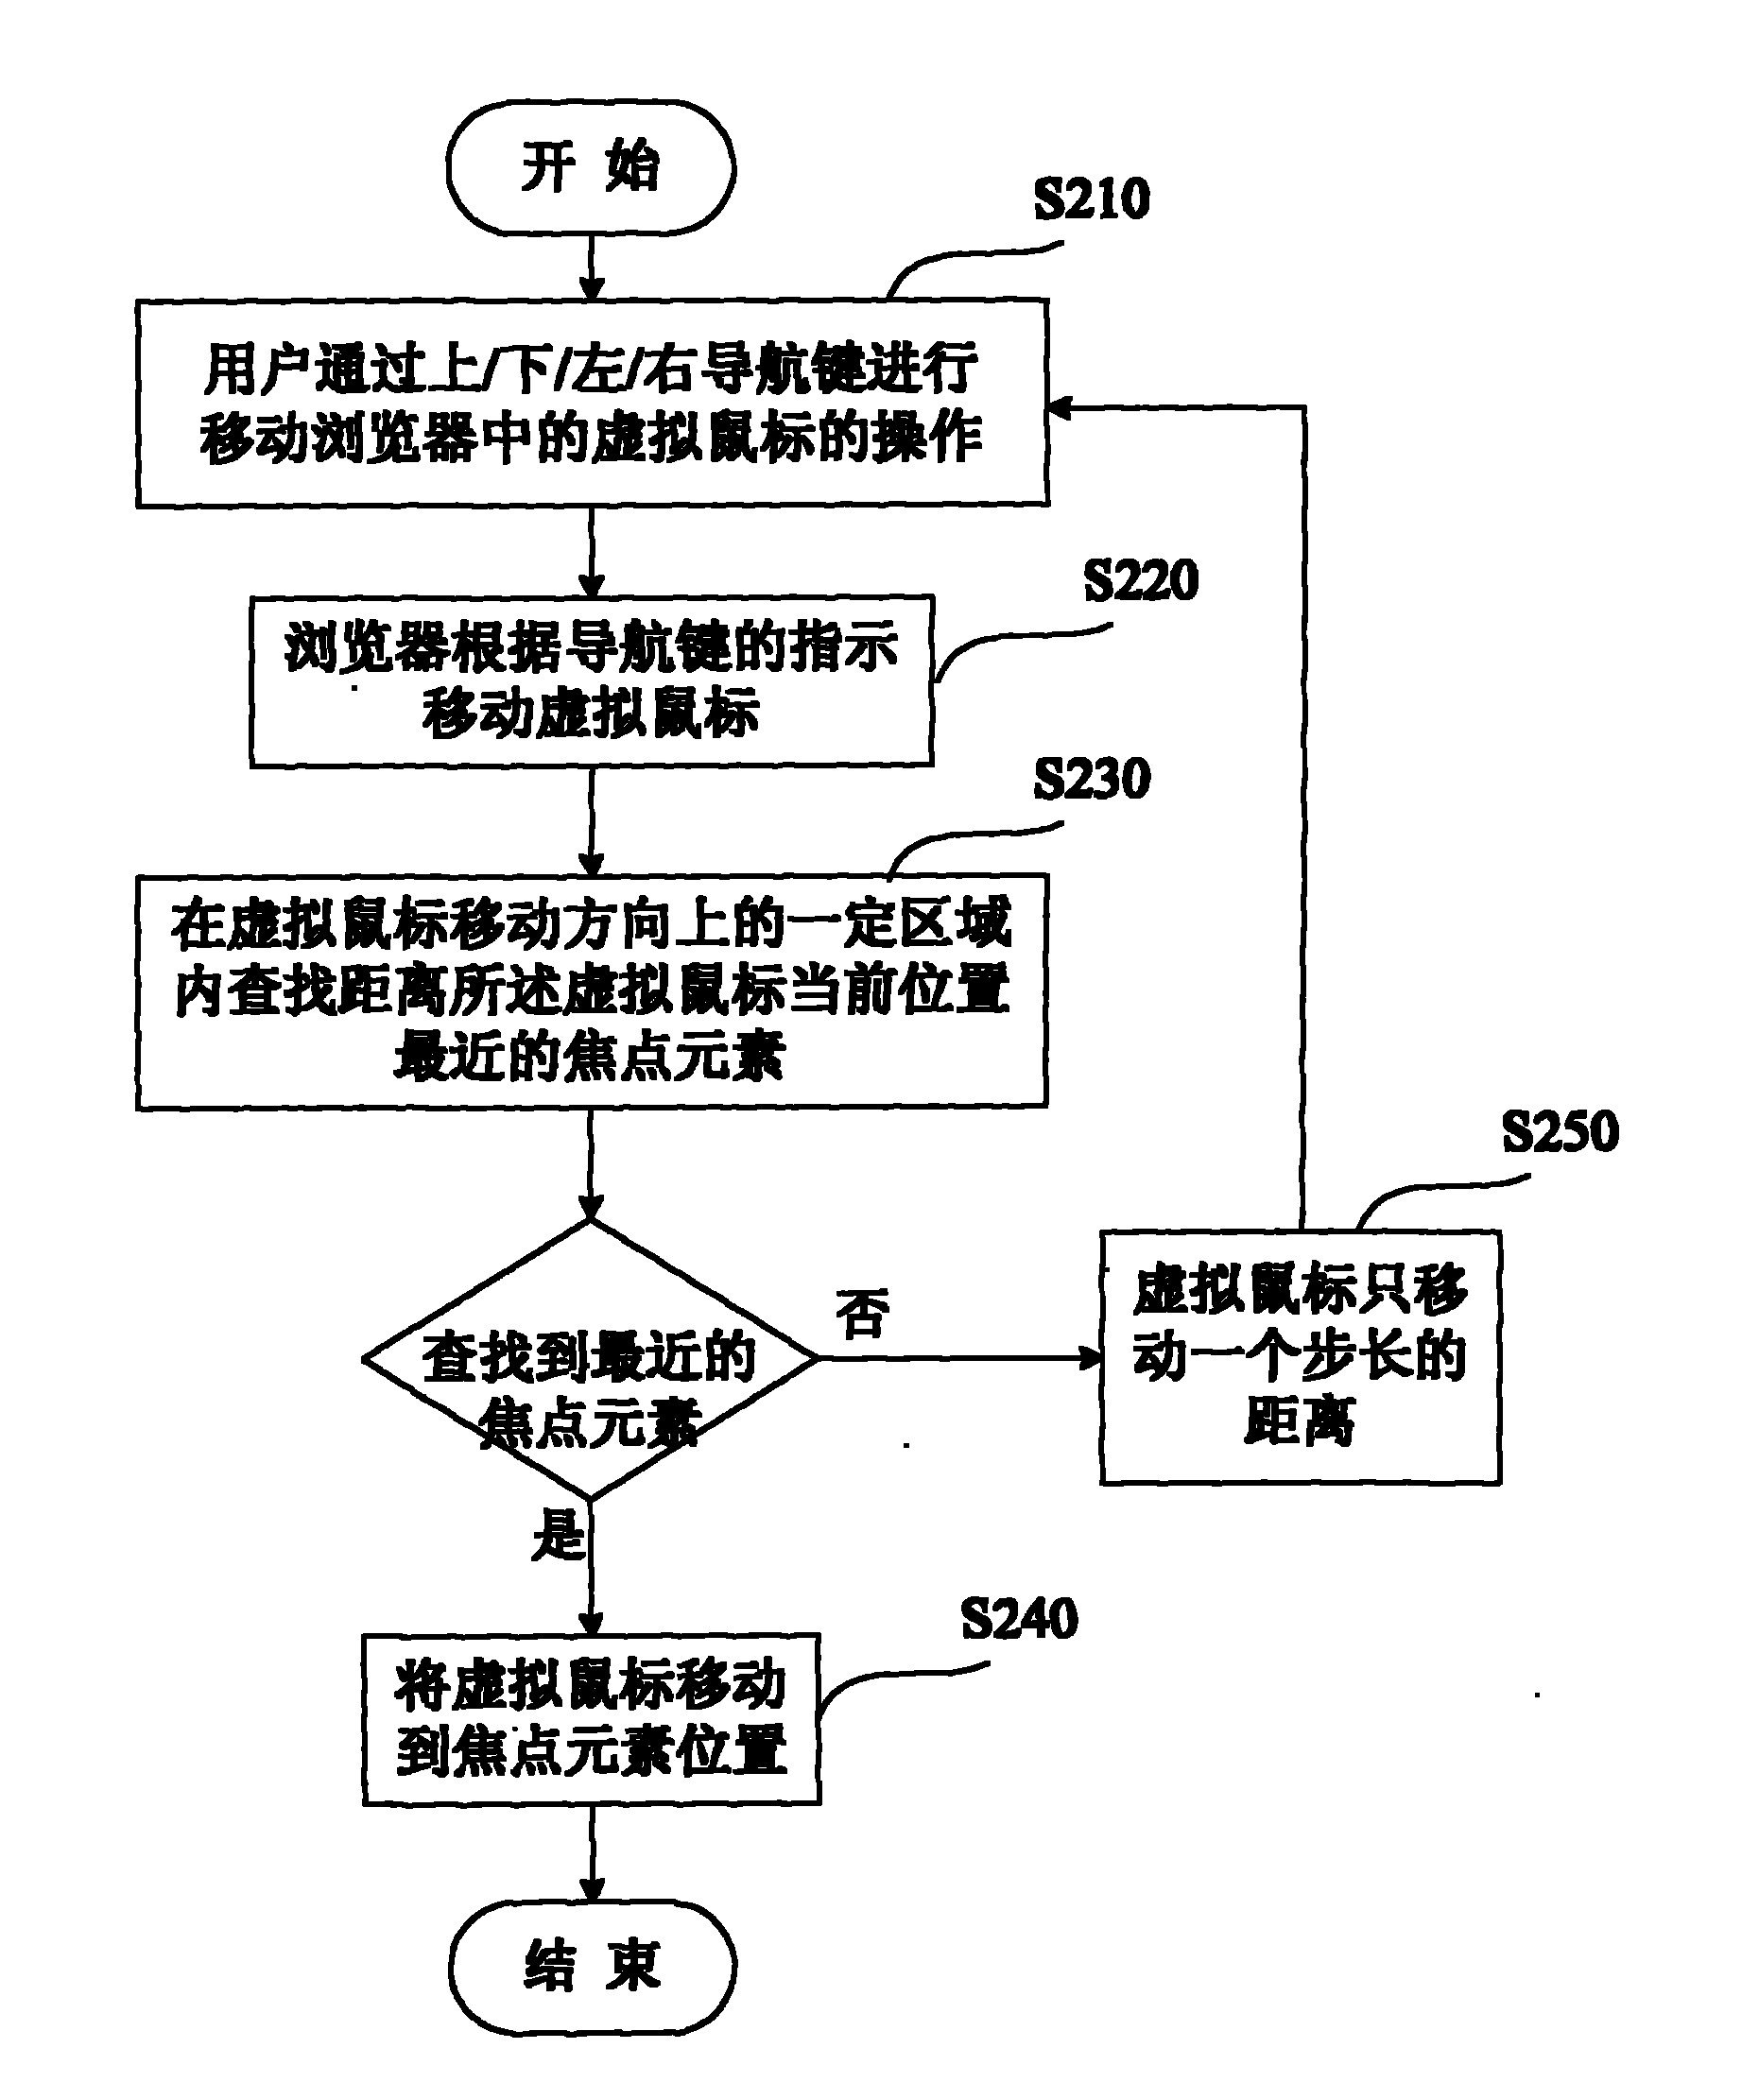 Method and device for locking focus element in webpage browsing process